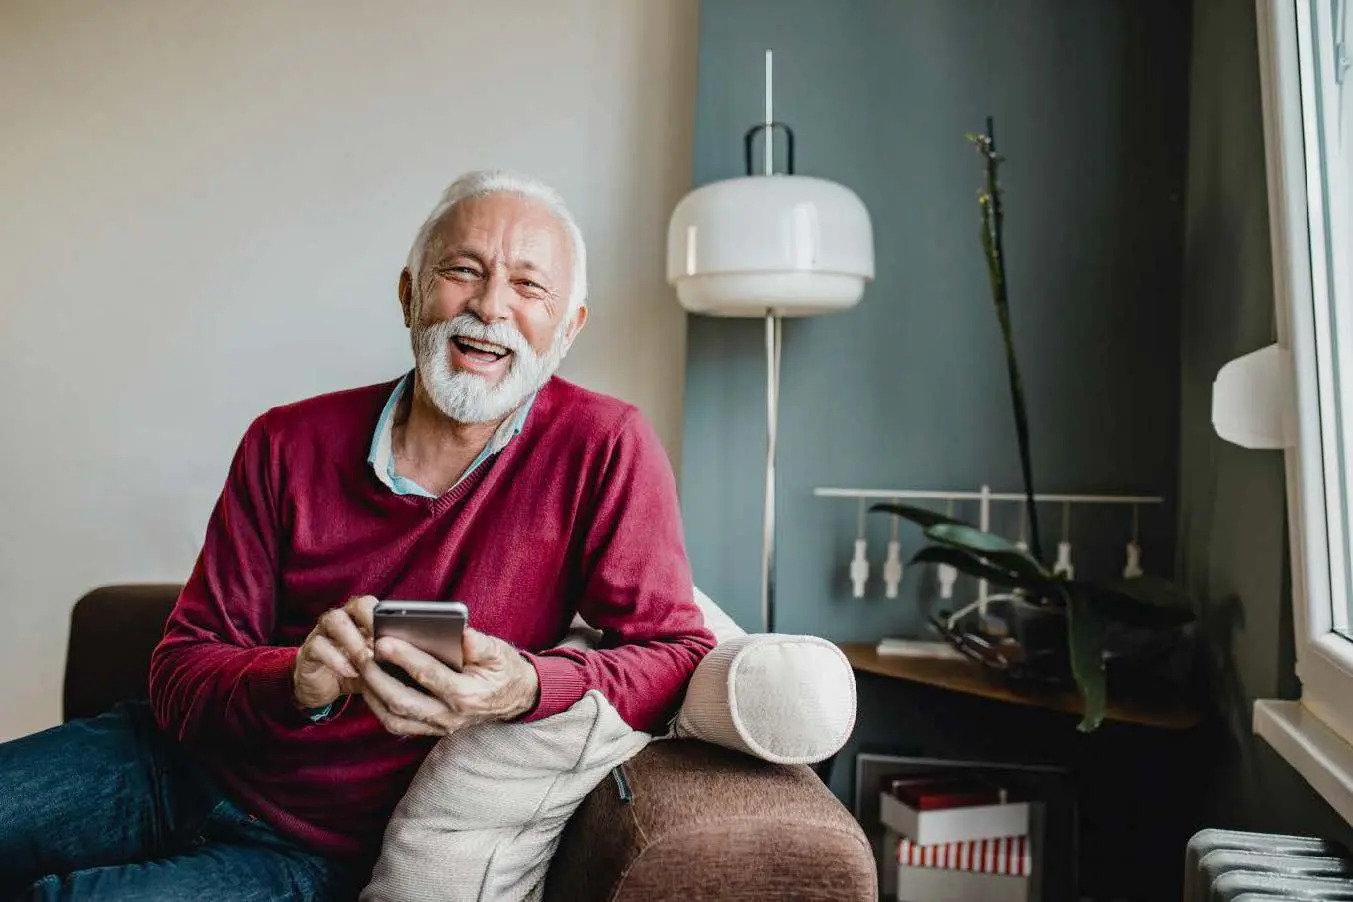 Man sitting on a sofa smiling with a mobile phone